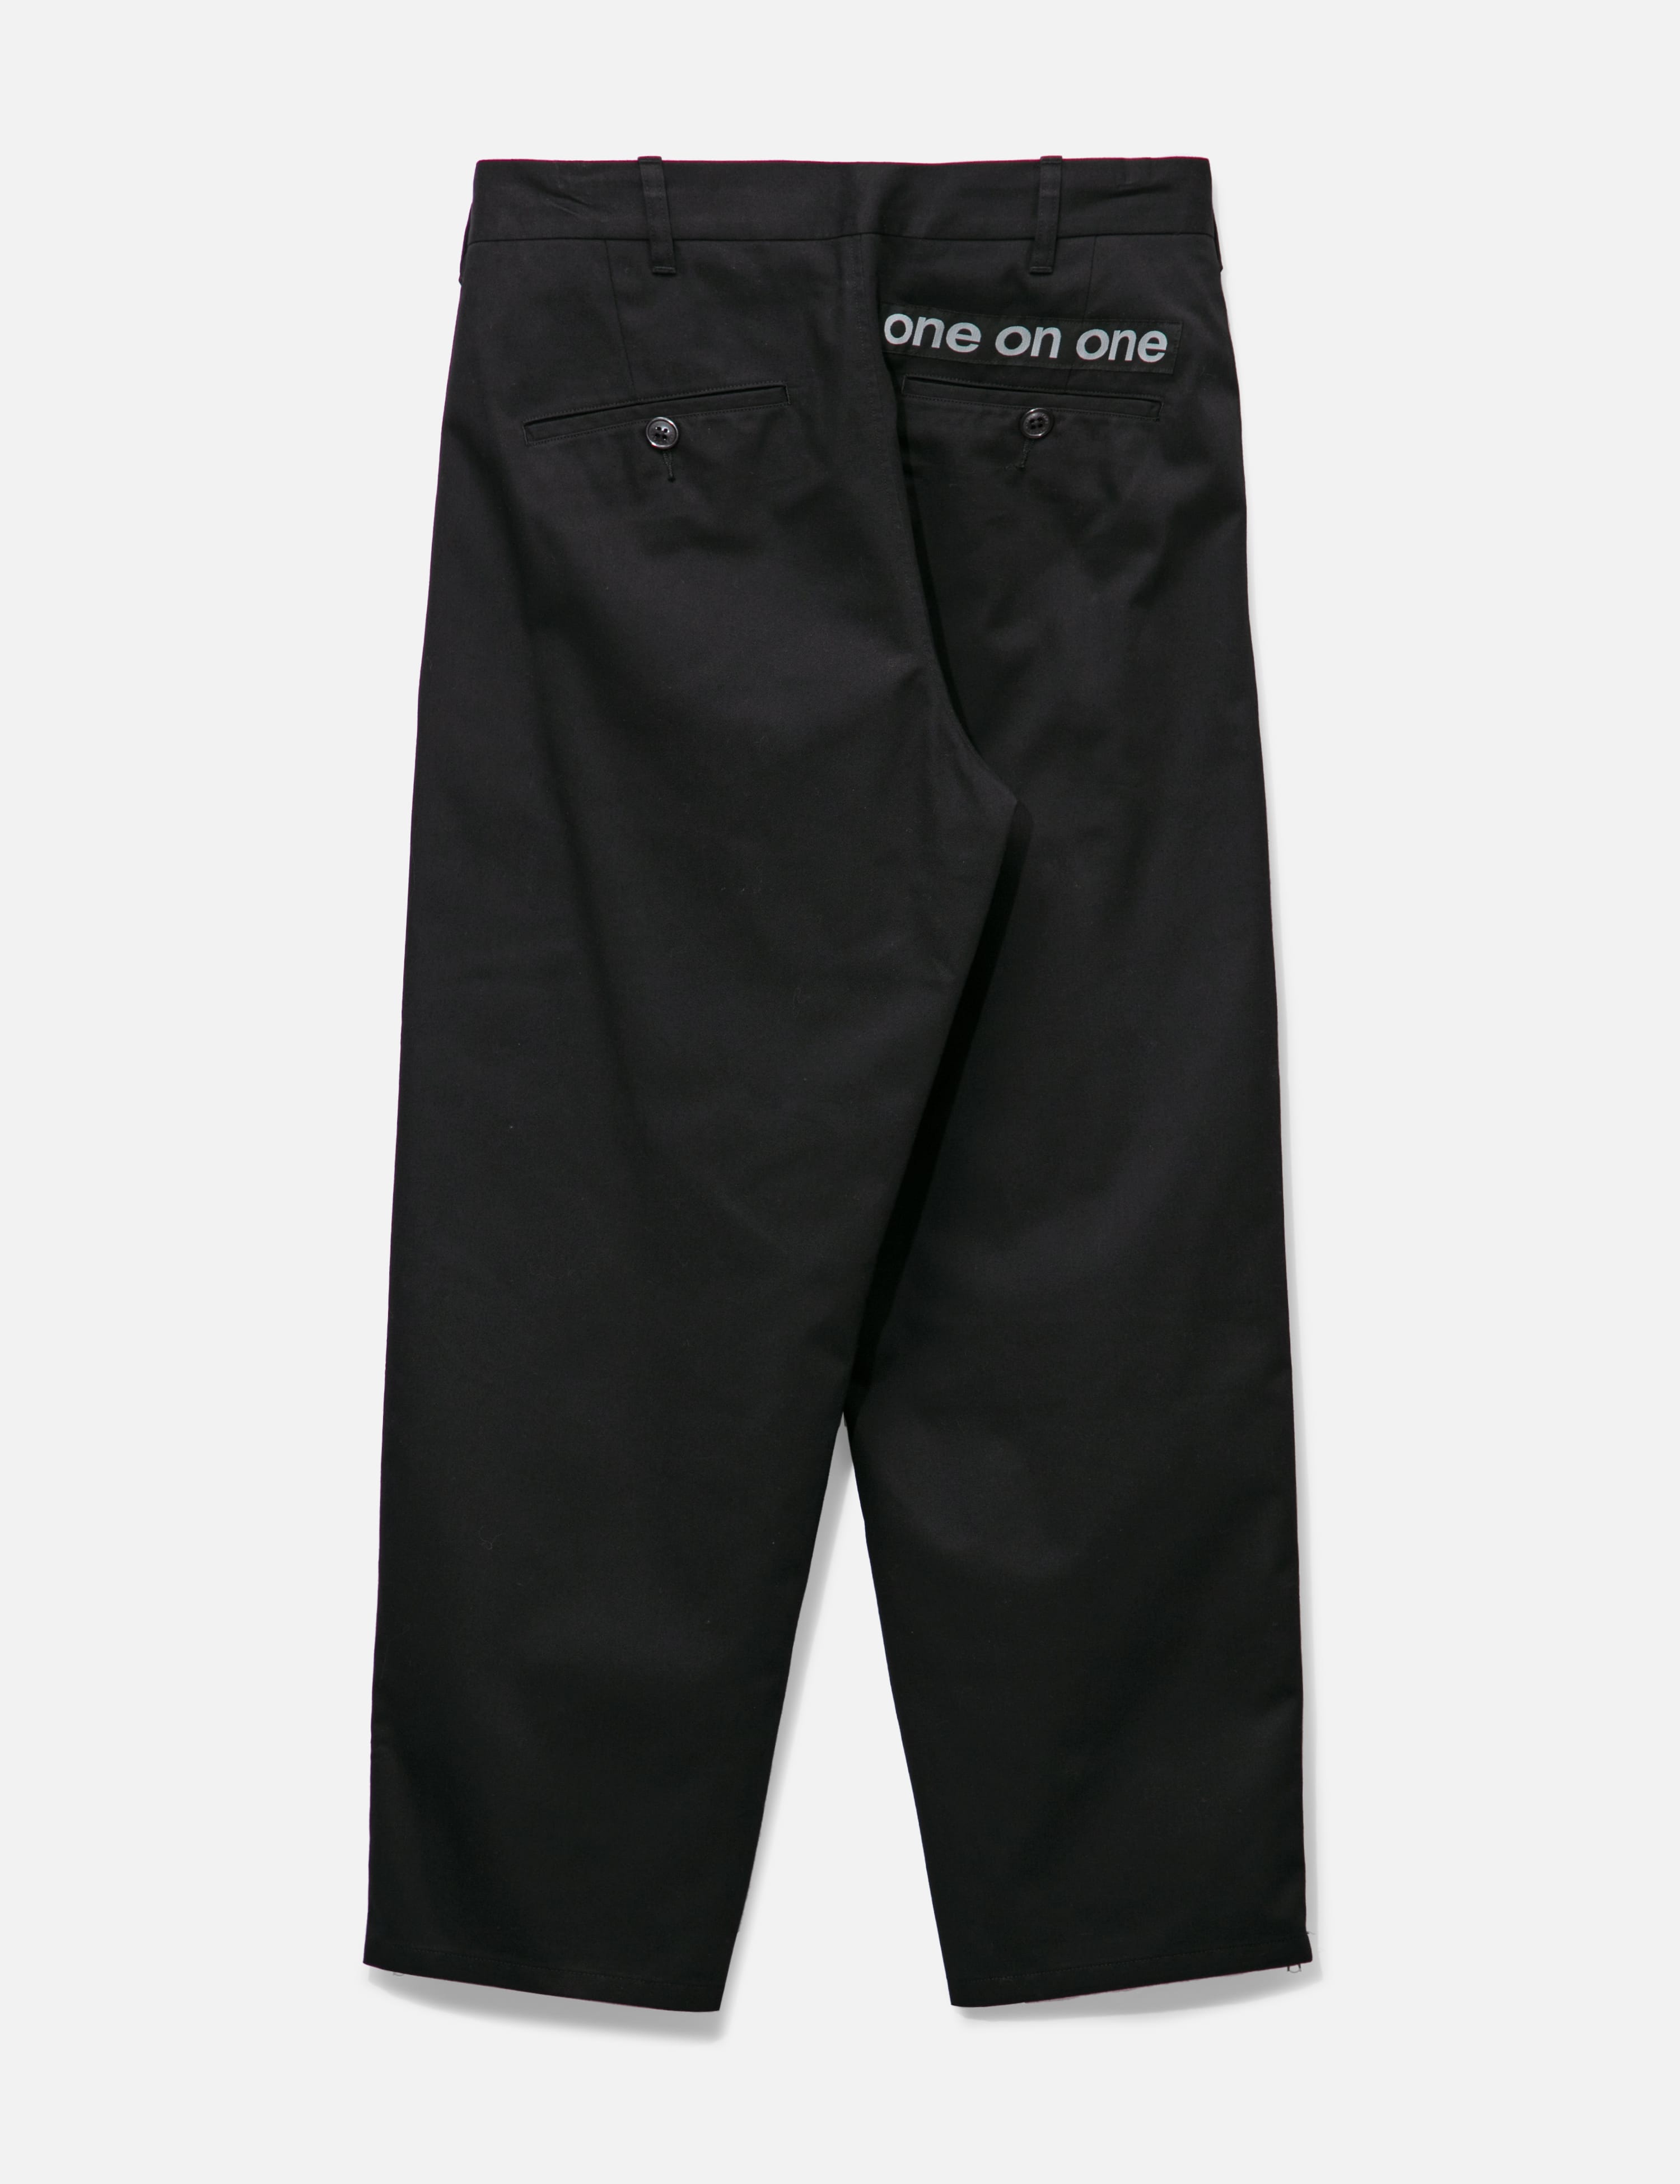 WTAPS - WTAPS X UNDERCOVER ZIP-UP PANTS | HBX - Globally Curated